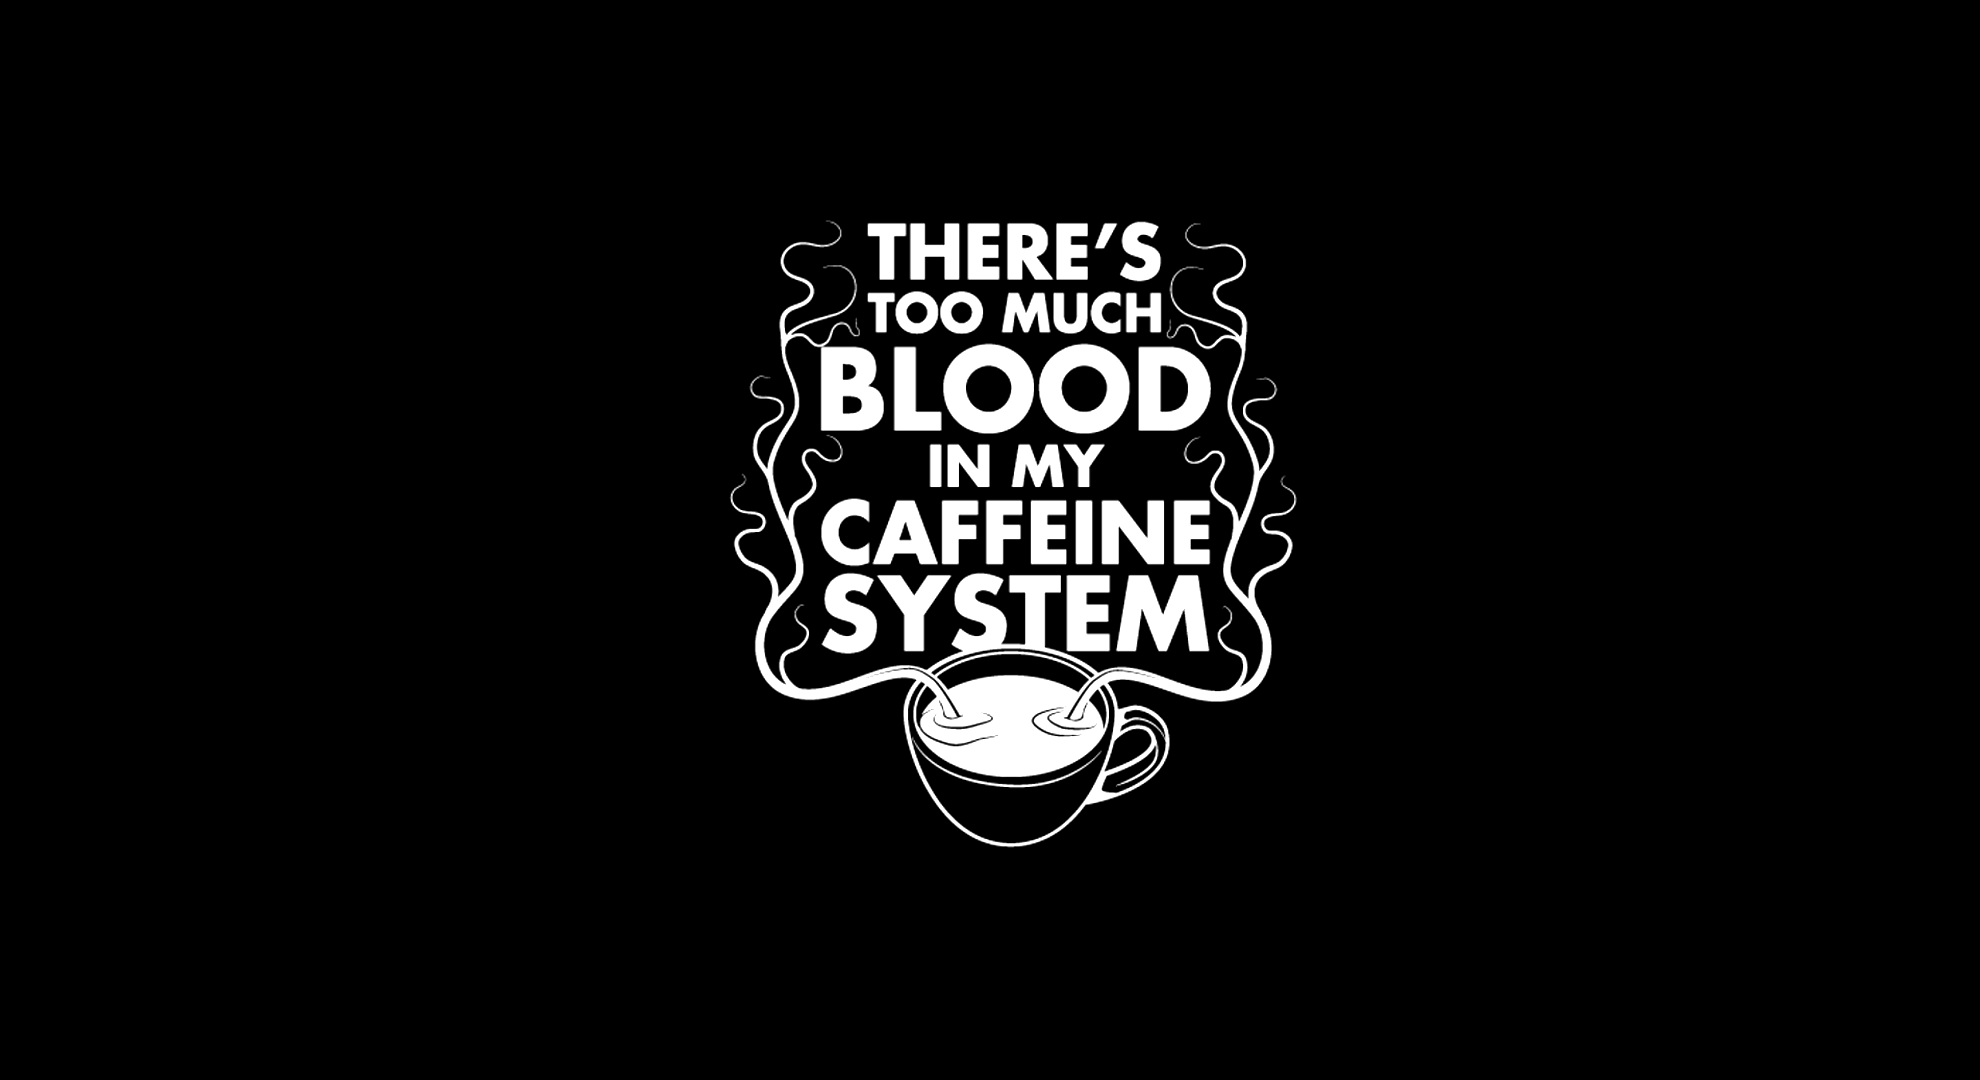 There's Too Much Blood in My Caffeine System